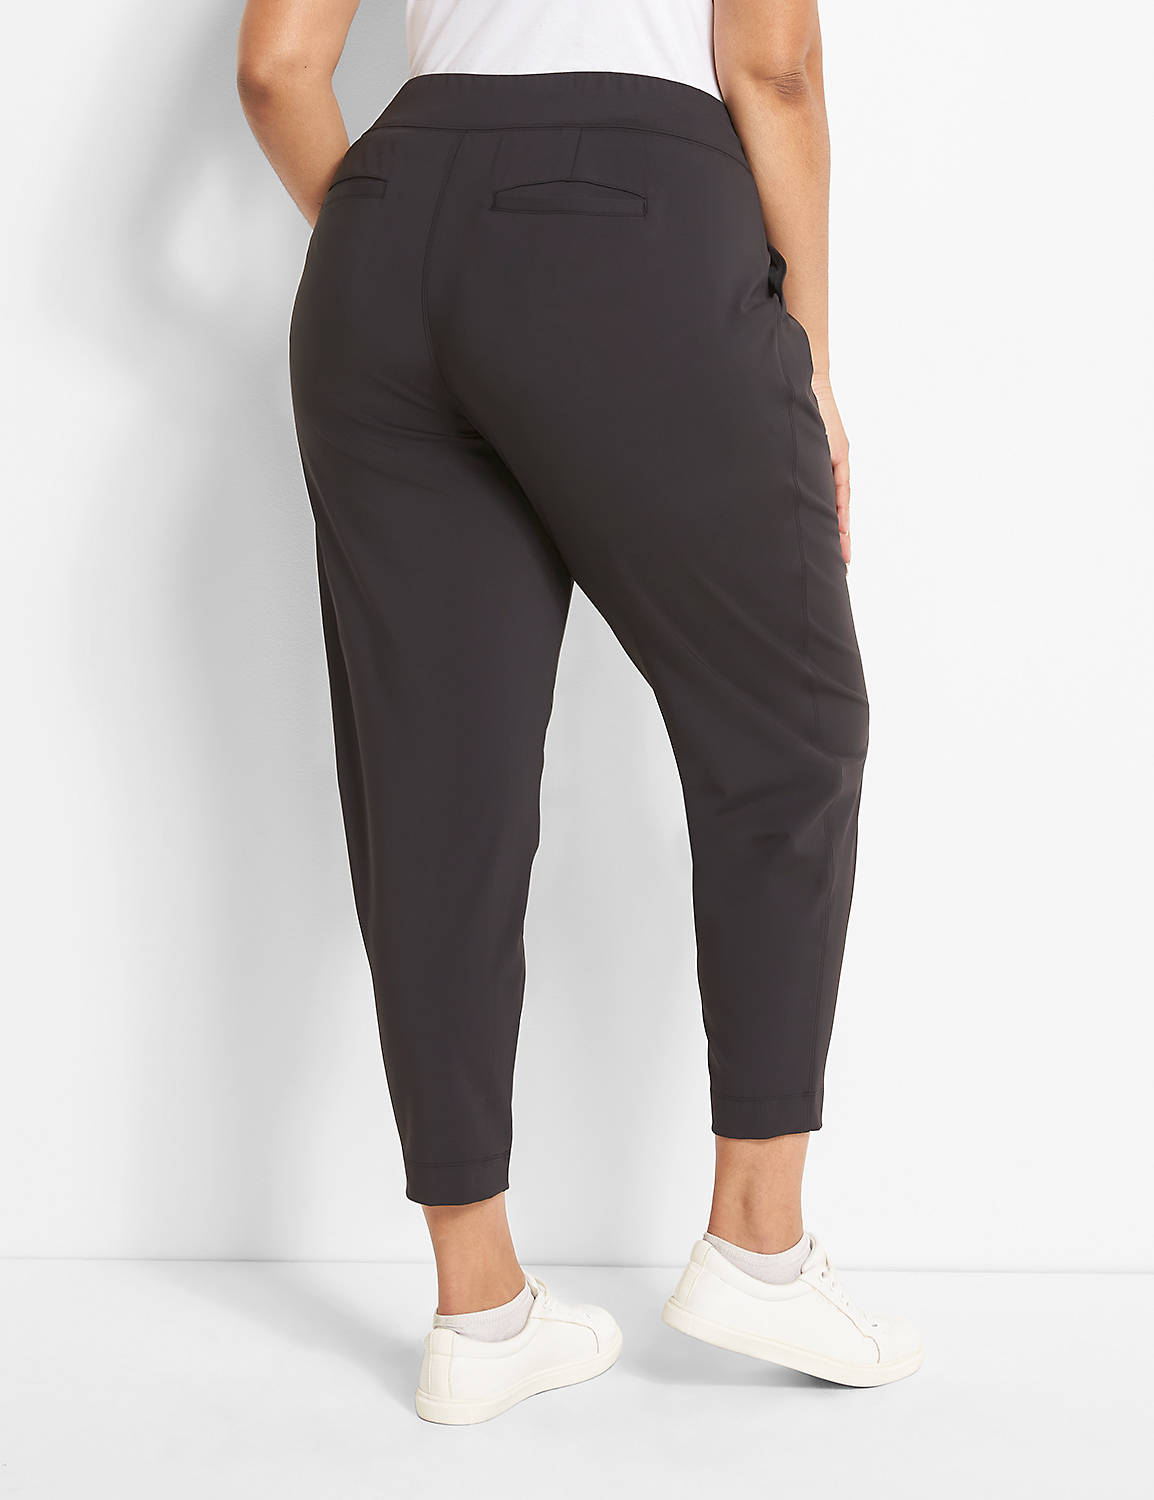 1105749 F Knit Stretch Trouser:Pitch Black LB 1000322:14/16 Product Image 2